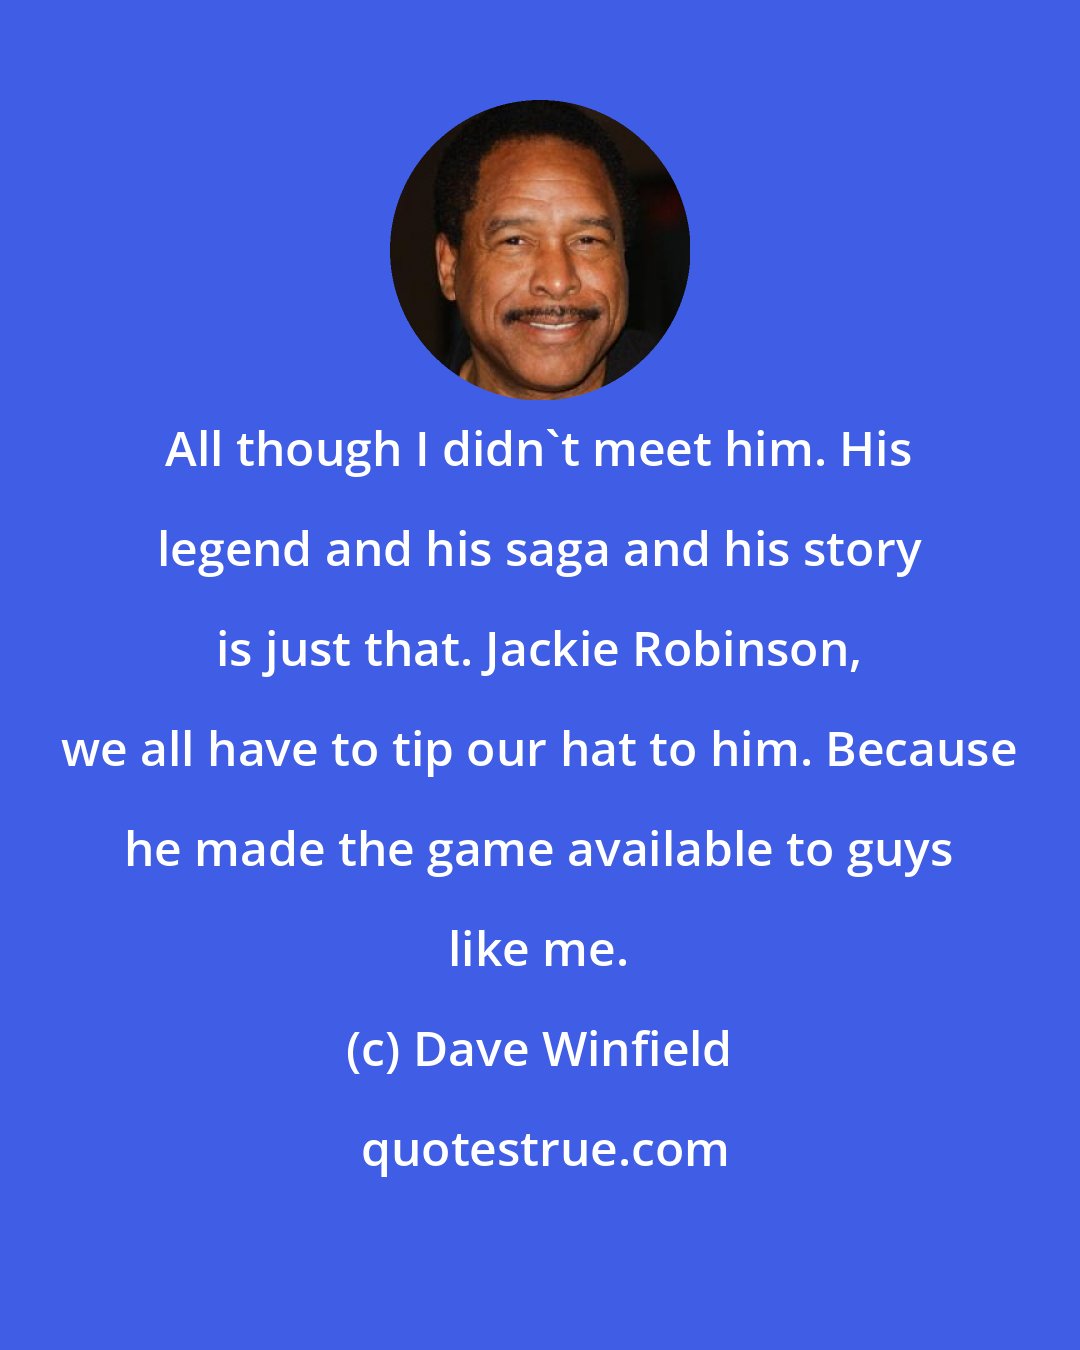 Dave Winfield: All though I didn't meet him. His legend and his saga and his story is just that. Jackie Robinson, we all have to tip our hat to him. Because he made the game available to guys like me.